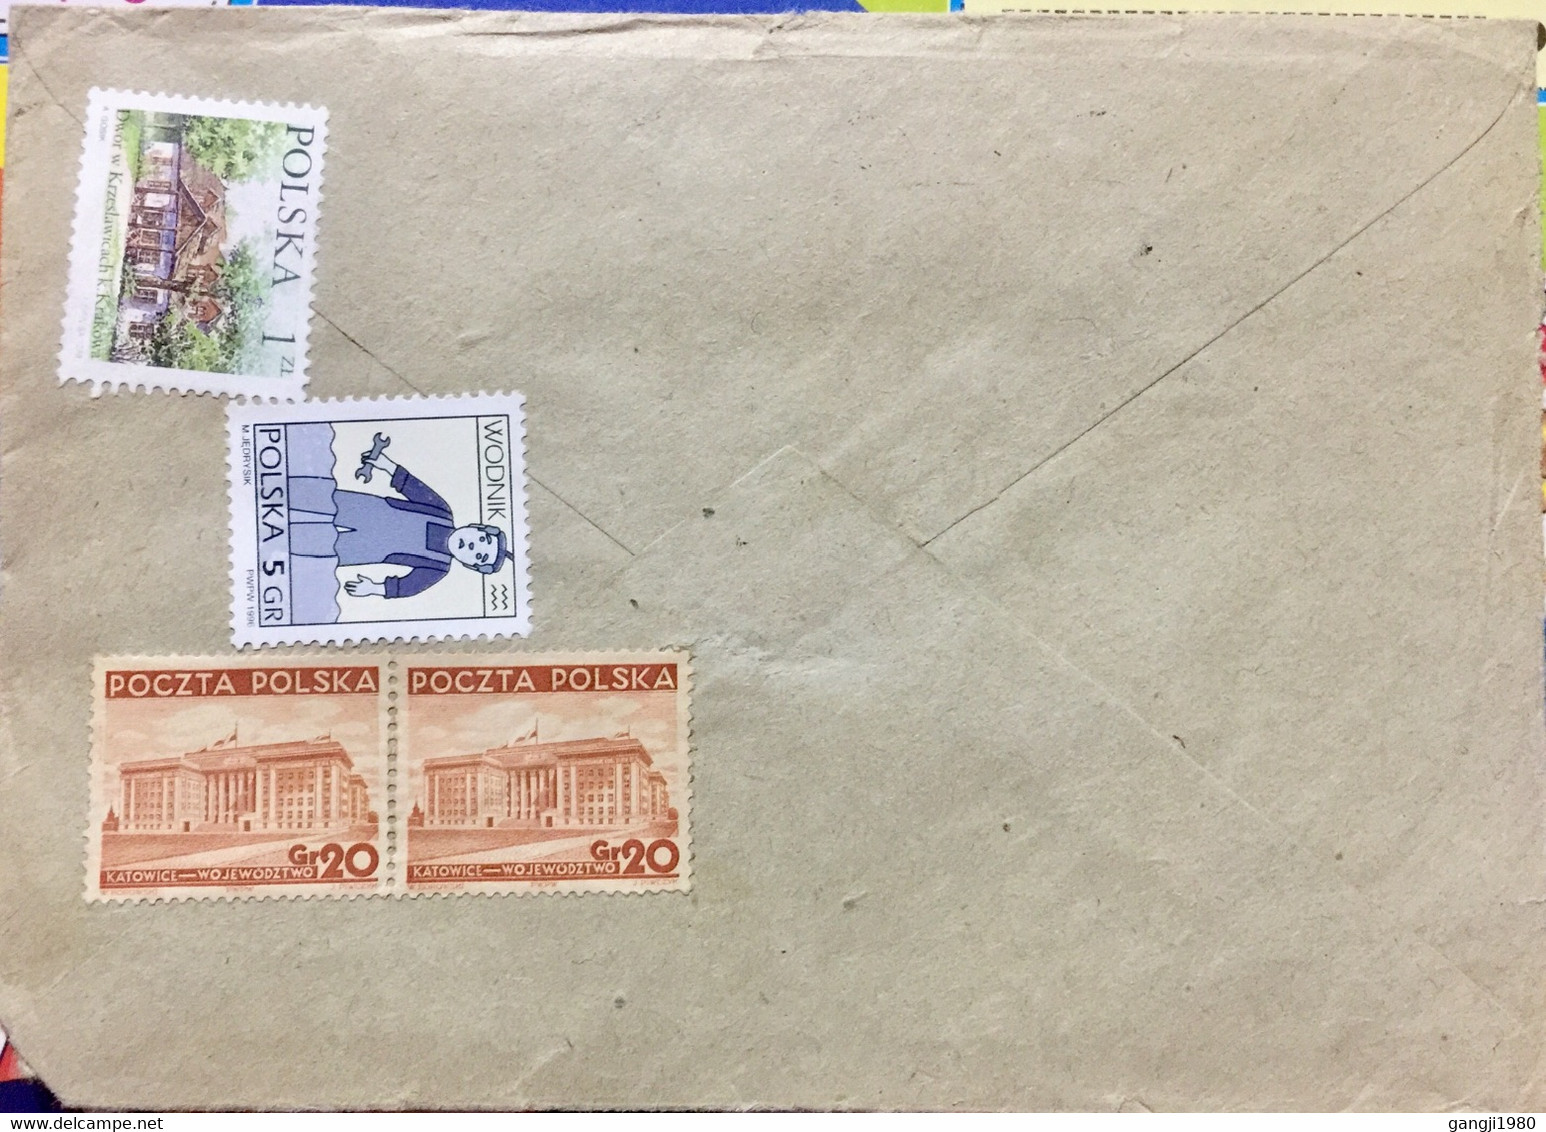 POLAND 2000, USED AIRMAIL COVER TO INDIA 4 DIFFERENT 1958 PICTURAL SPECIAL CANCELLATION, KATOWIDE ,HOUSE MUSIC,BUILDIN, - Briefe U. Dokumente